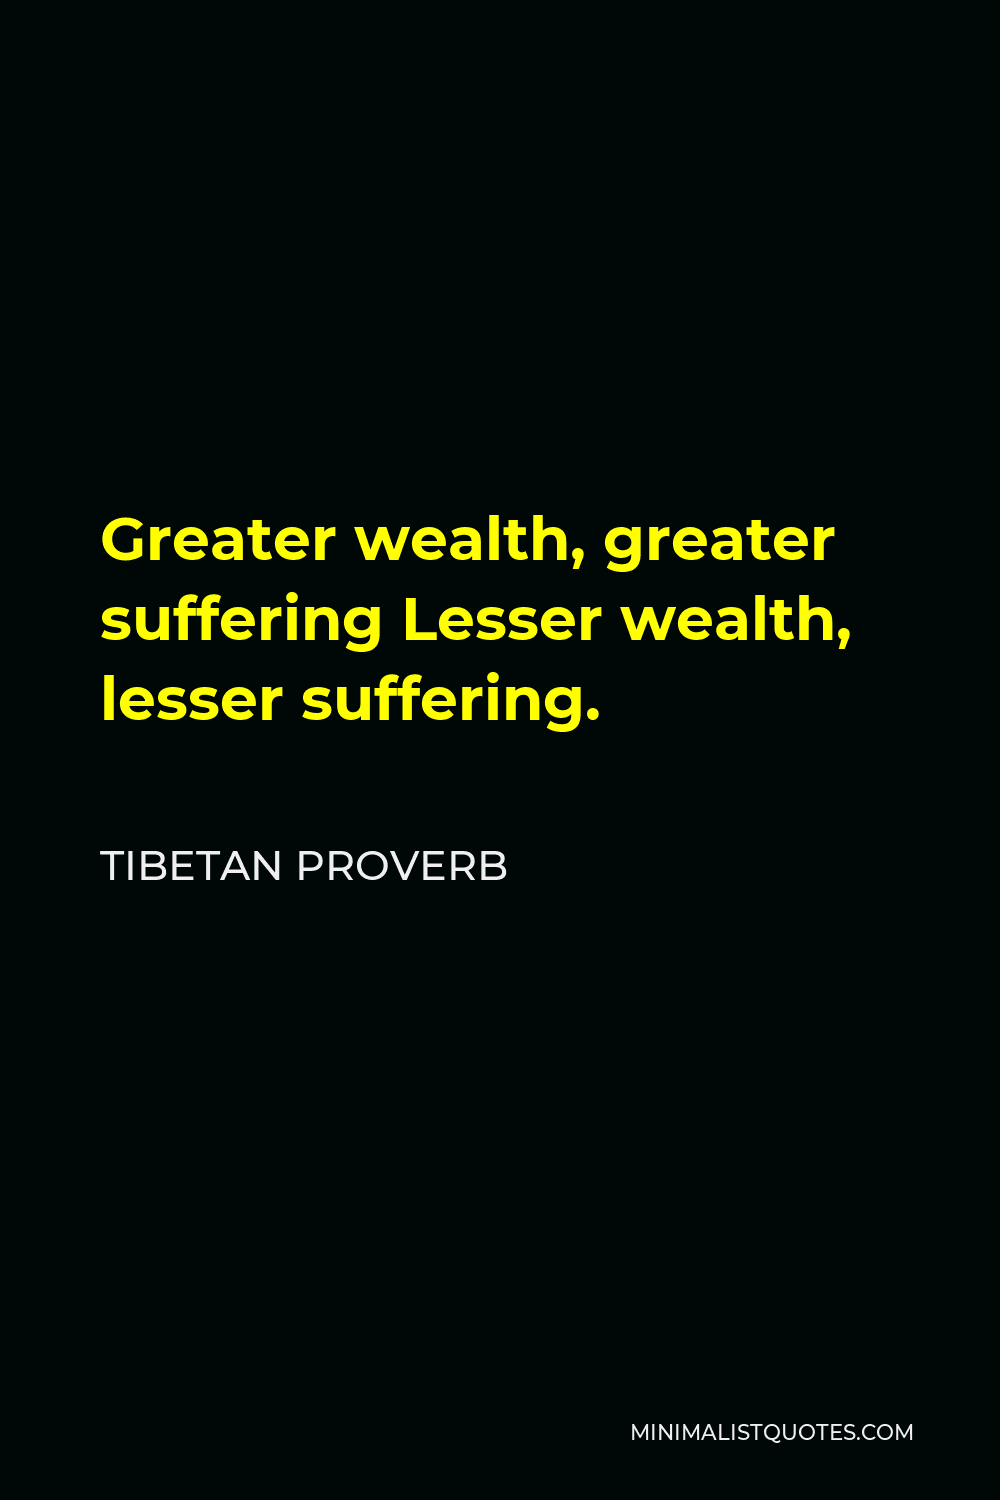 Tibetan Proverb Quote - Greater wealth, greater suffering Lesser wealth, lesser suffering.